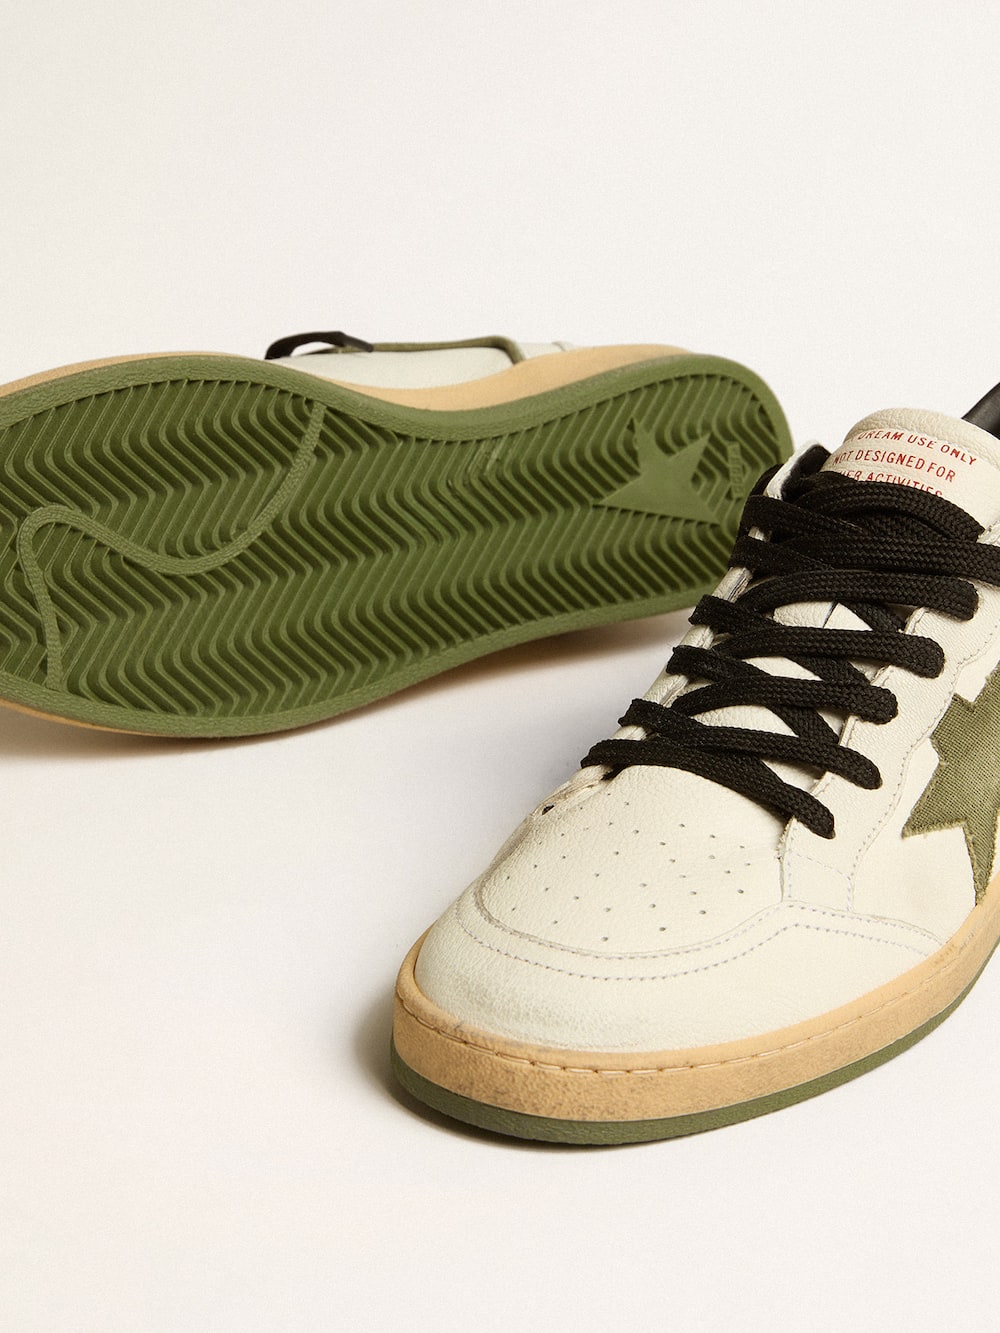 Golden Goose - Men's Ball Star LTD in nappa leather with canvas star and black leather heel tab in 